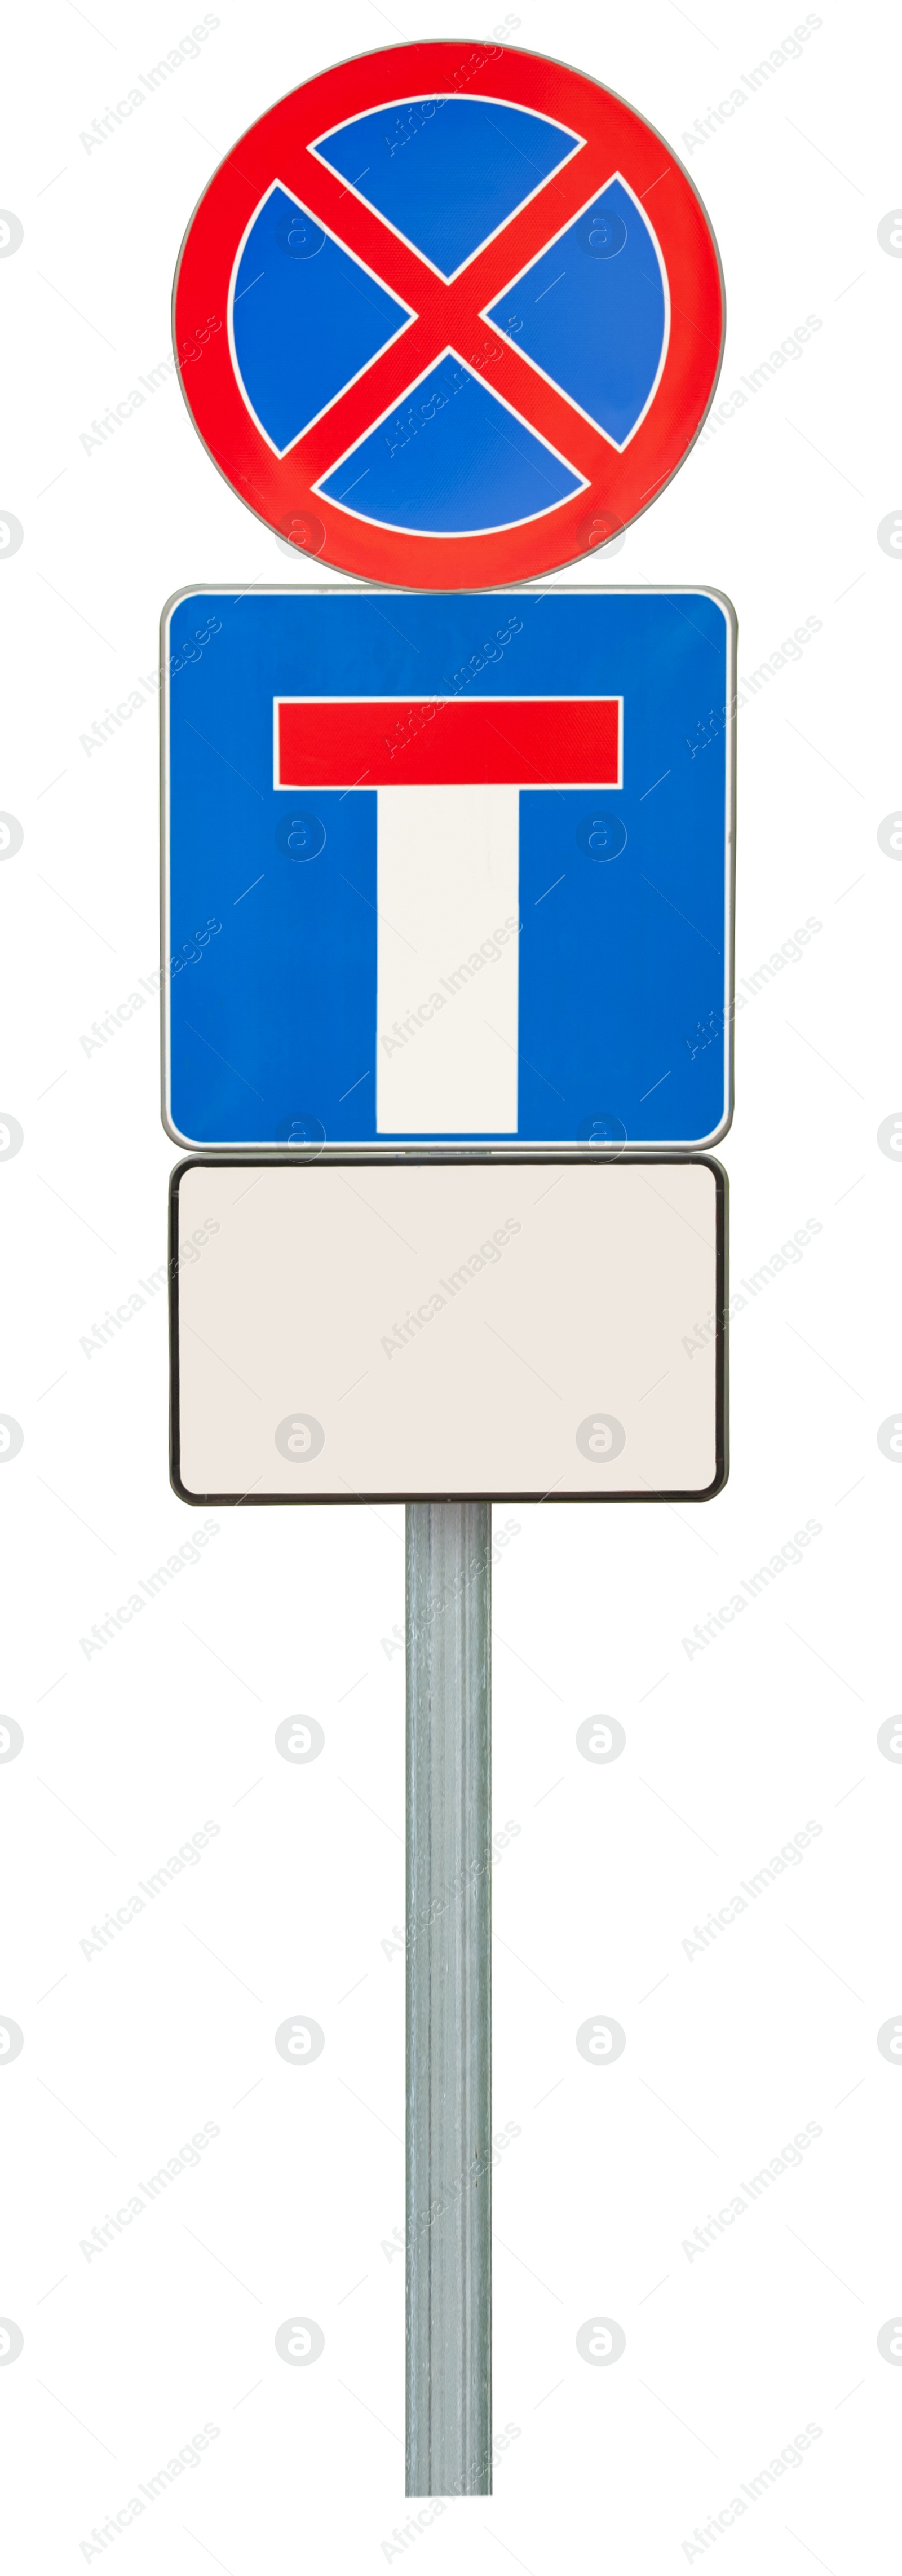 Image of Post with different traffic signs isolated on white